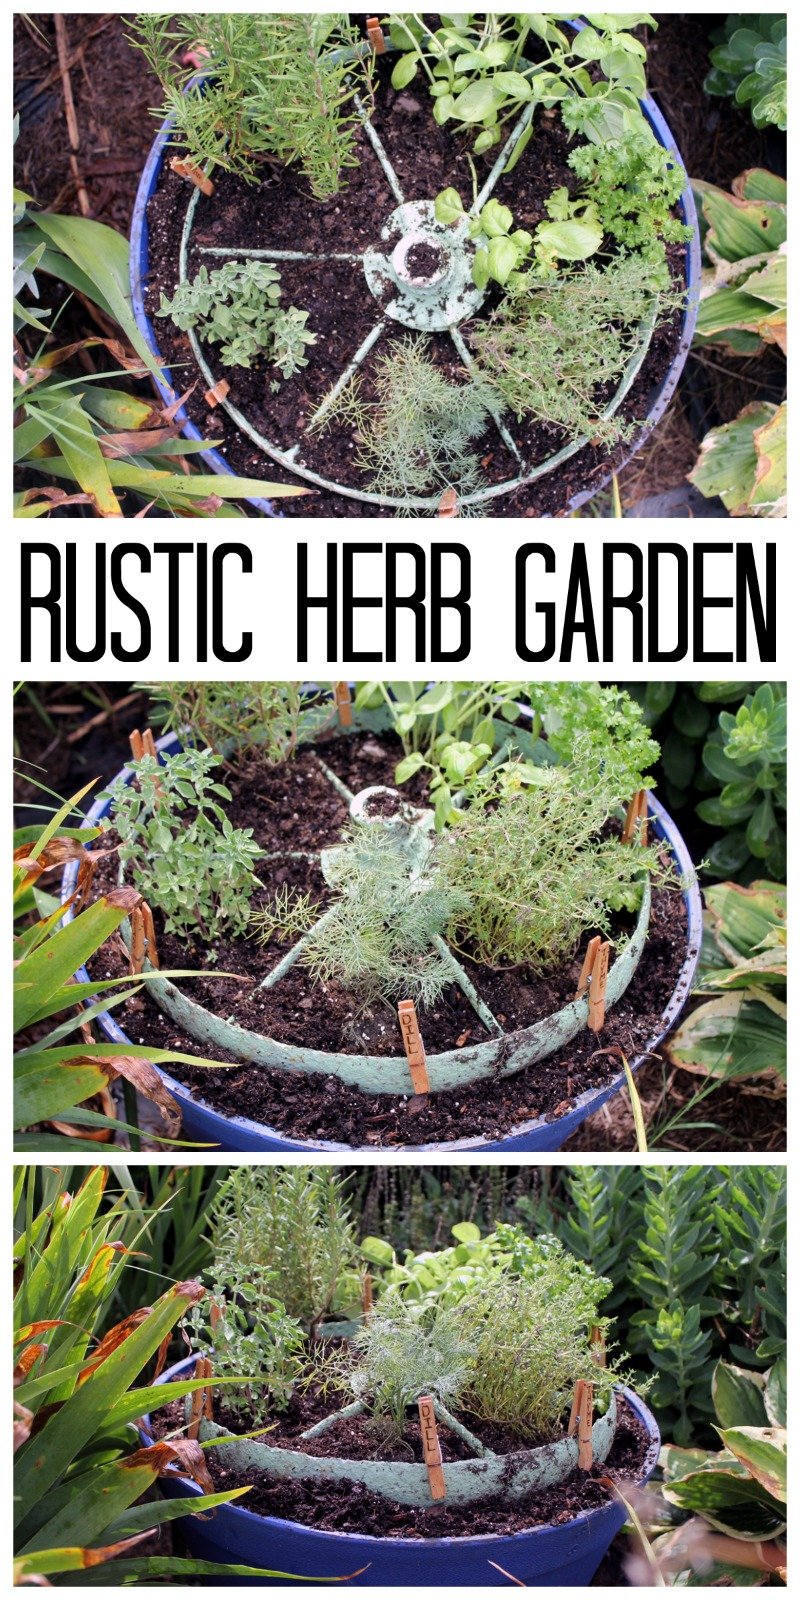 Herb garden design - make a rustic herb garden with an old wheel! Plus instructions on making clothespin herb markers!Herb garden design - make a rustic herb garden with an old wheel! Plus instructions on making clothespin herb markers!